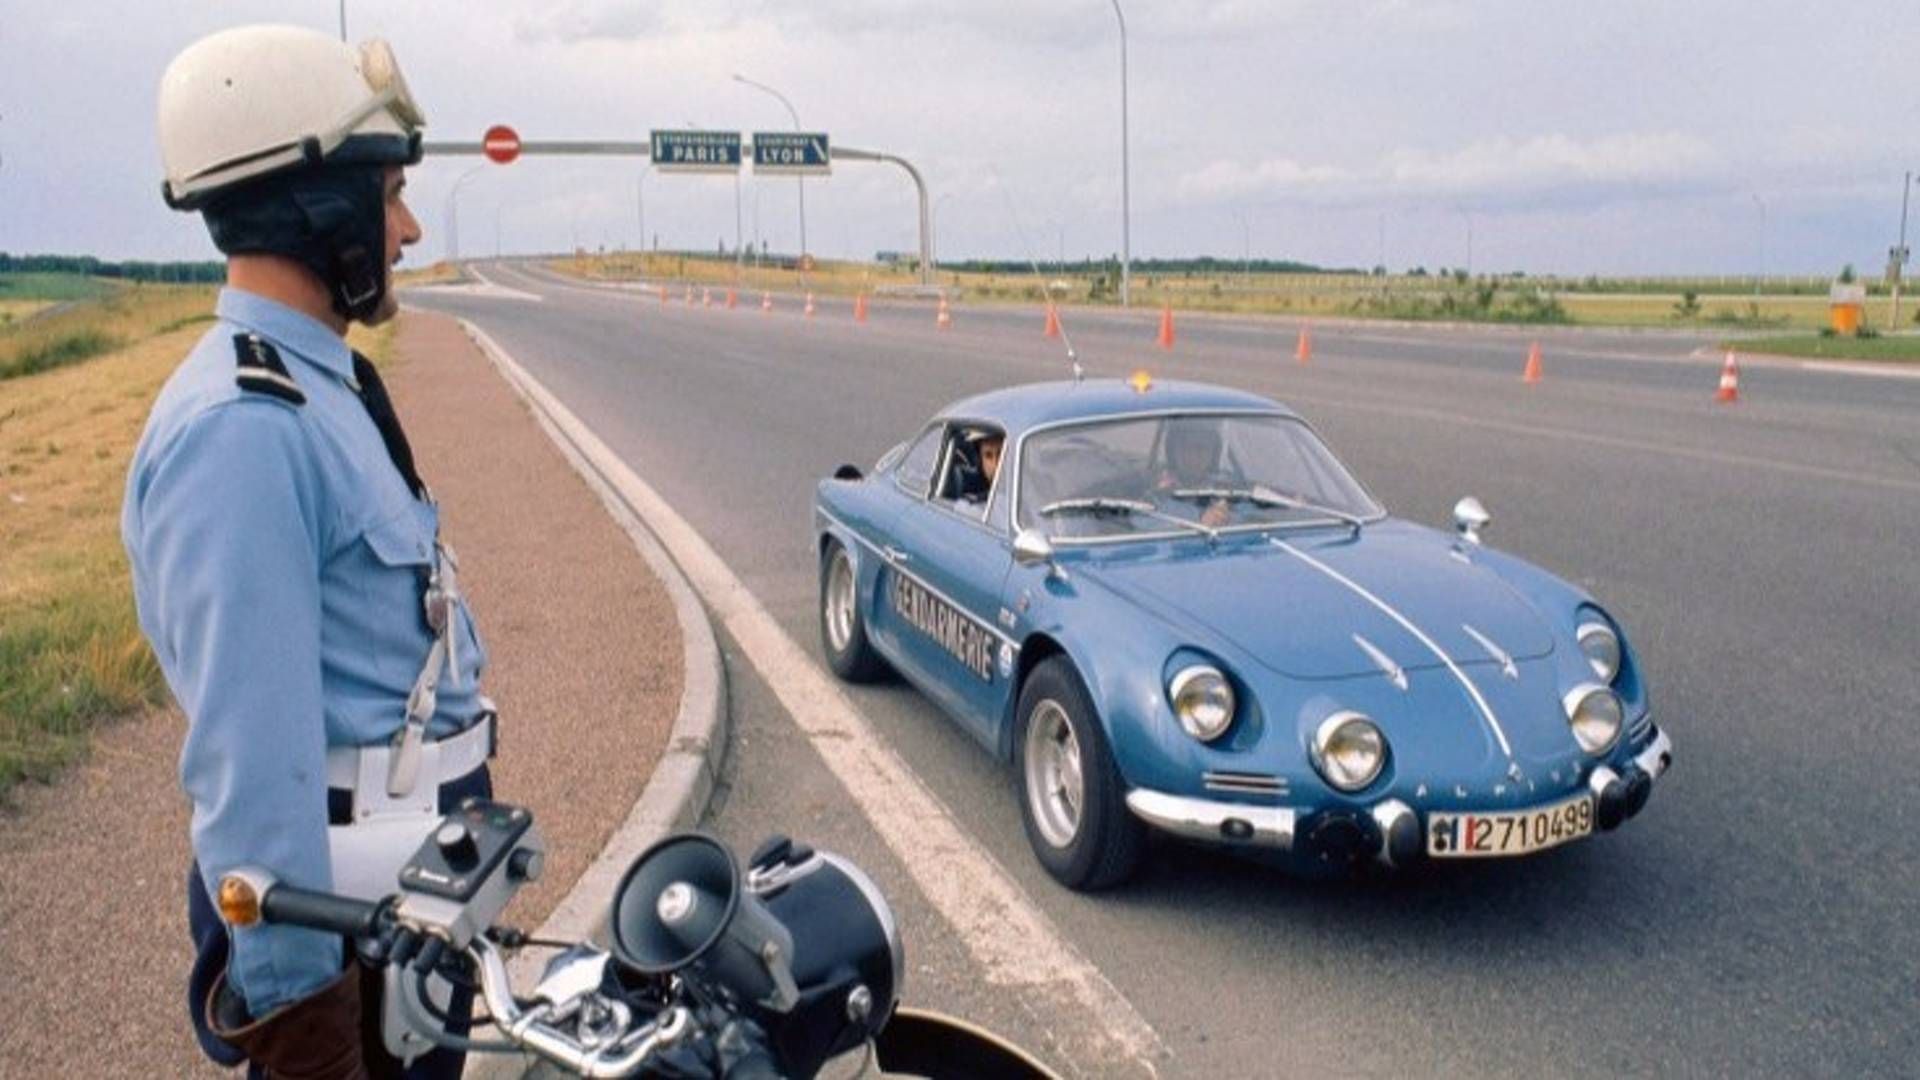 Blue Alpine A110 police car stopped next to a French motorcyclist police officer by a highway